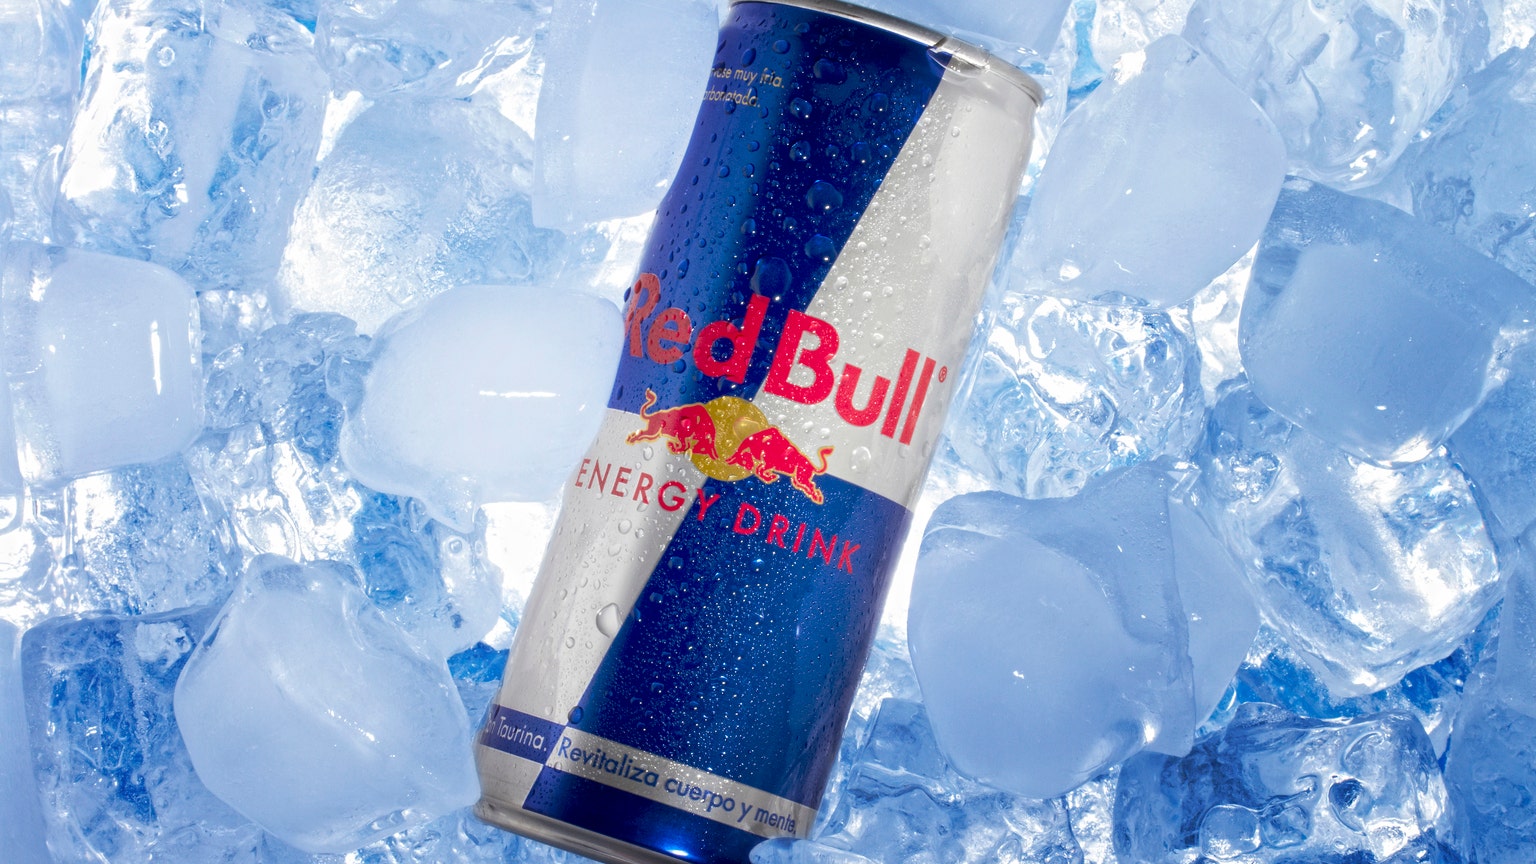 Energy drinks roundup: Red raided, Alpha Bull Monster Celsius for Seeking share gets and | market gains